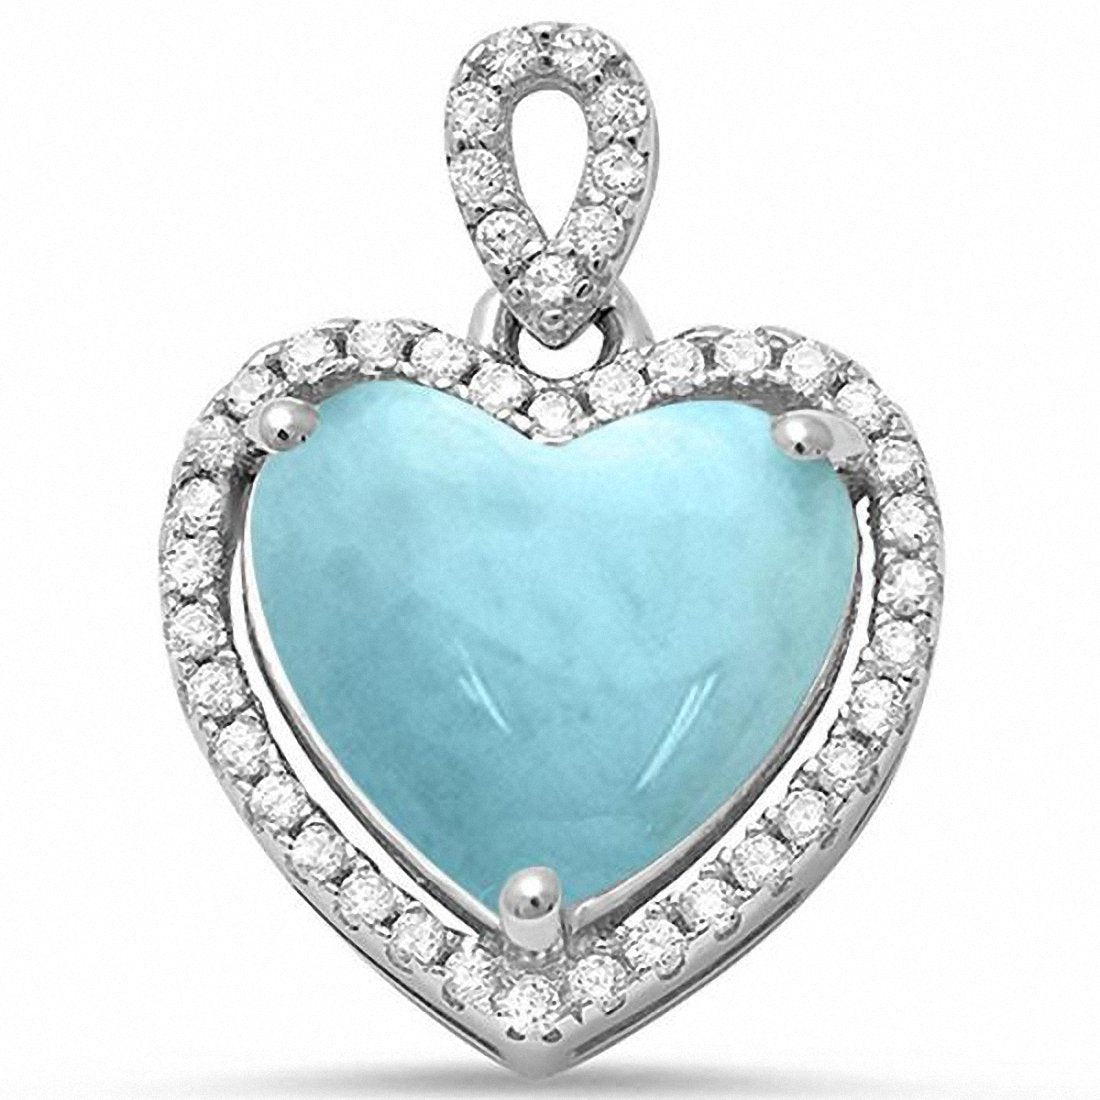 Halo Heart Pendant Heart Simulated Larimar 925 Sterling Silver